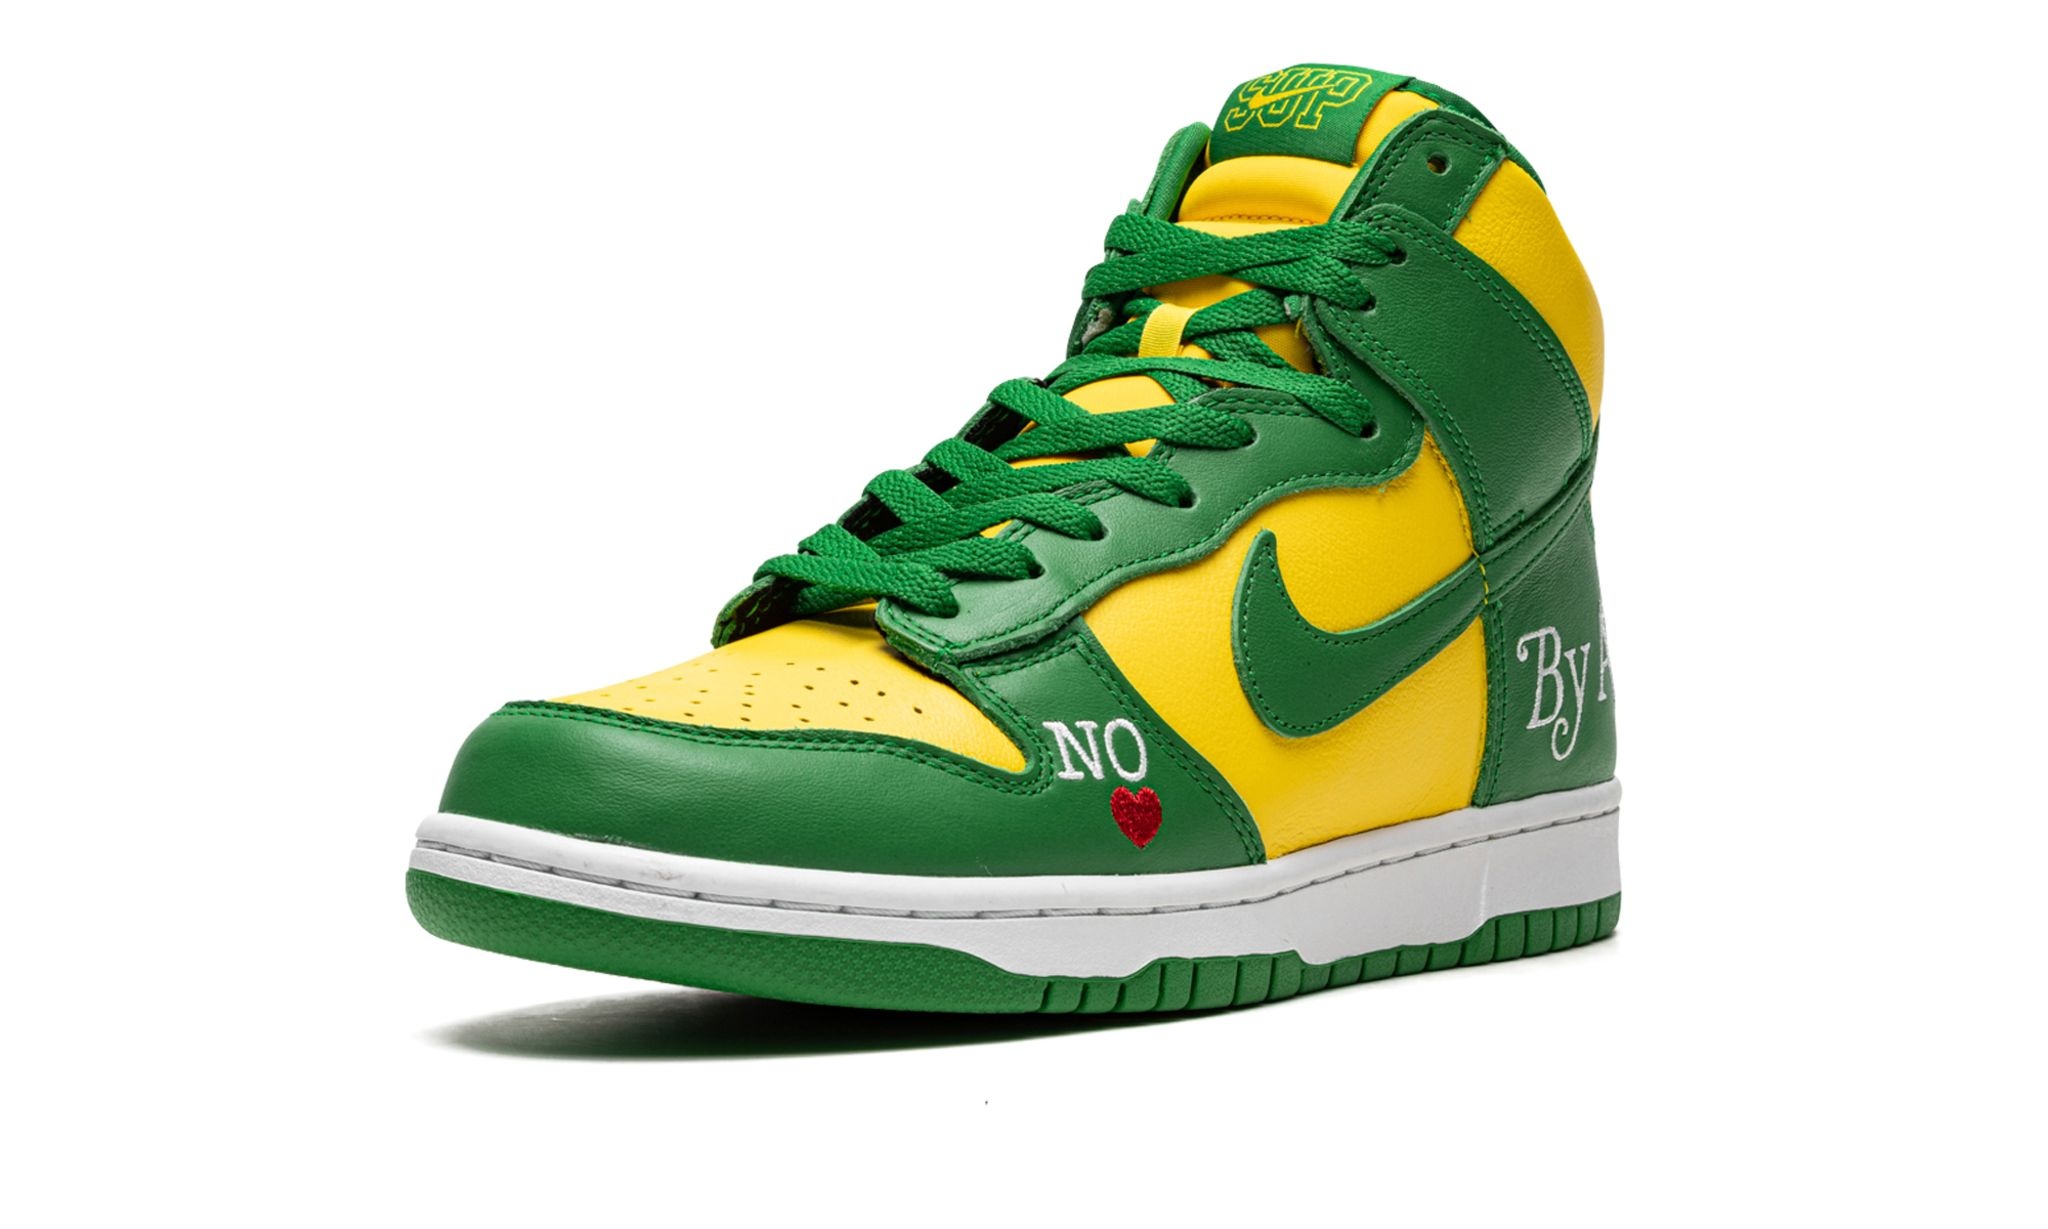 SB Dunk High "Supreme - By Any Means - Green/Yellow" - 4